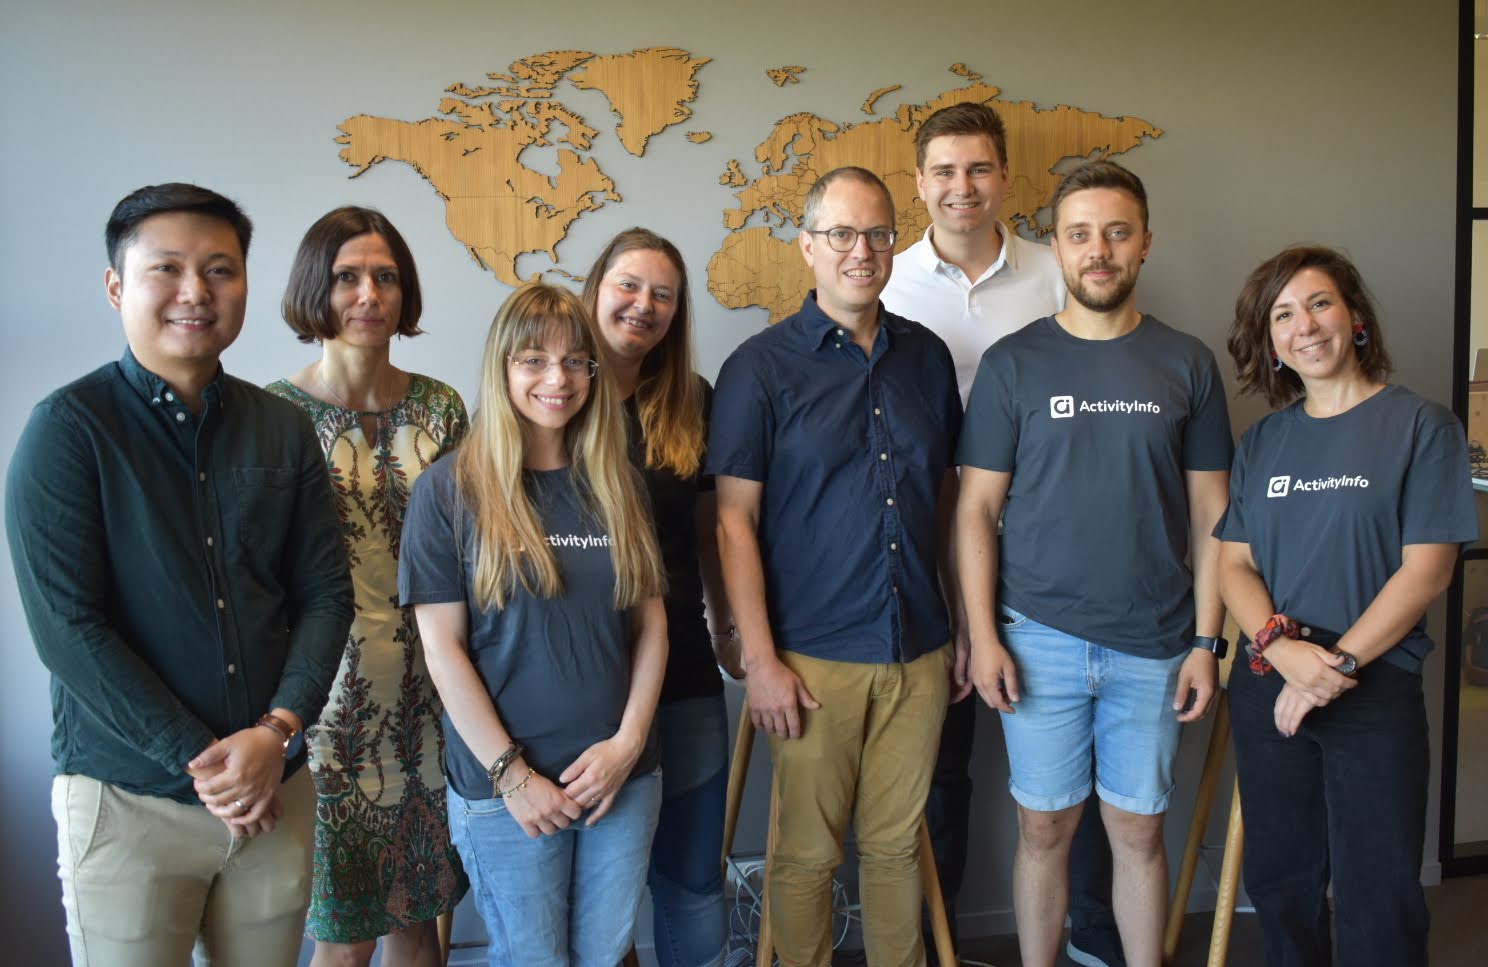 Image of the ActivityInfo team